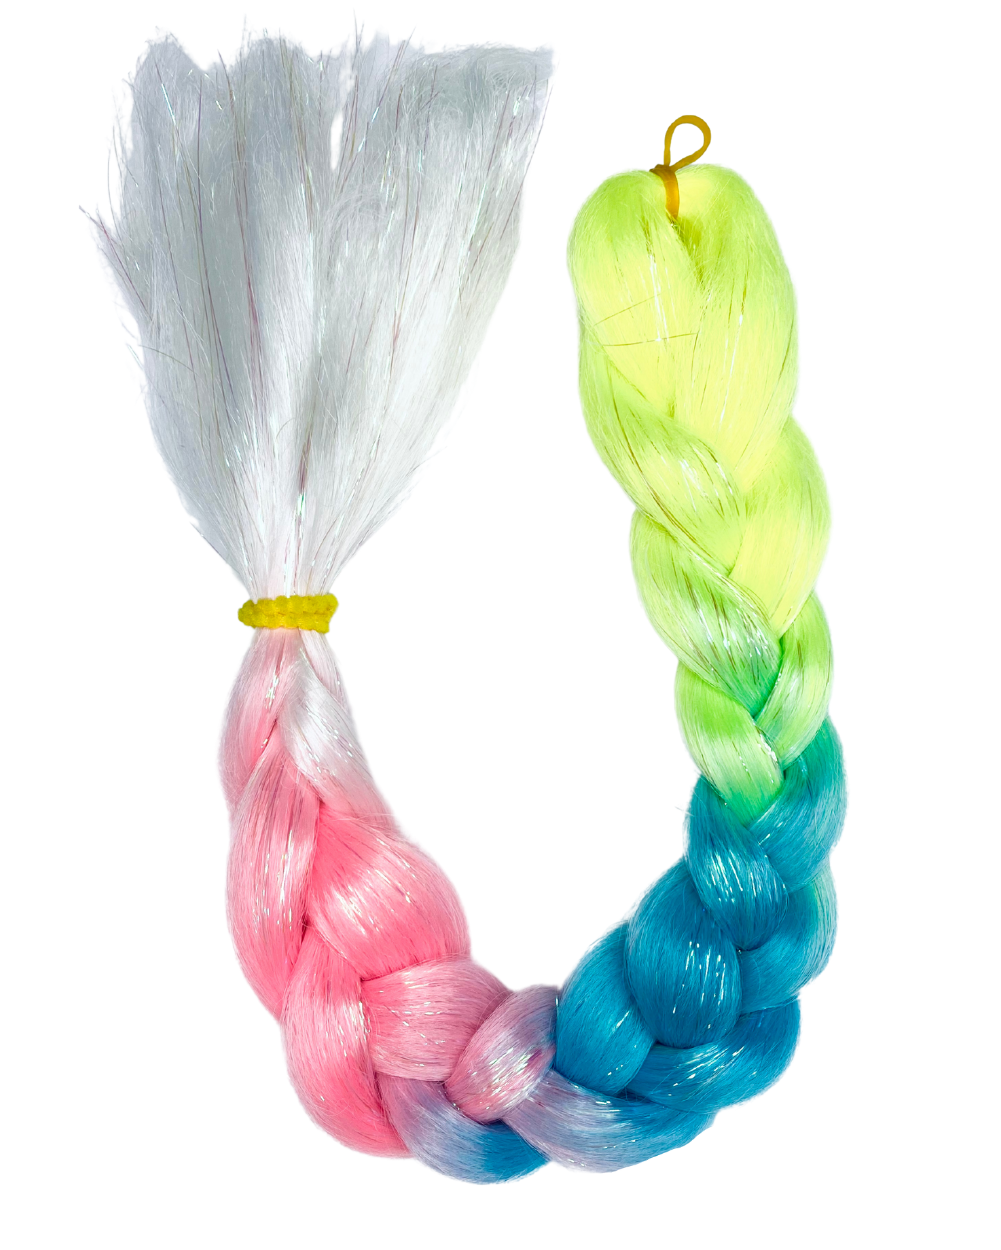 Moonstoned - UV-Reactive Neon Rainbow Ombré Hair Extension with Tinsel - Lunautics Braid-In Hair